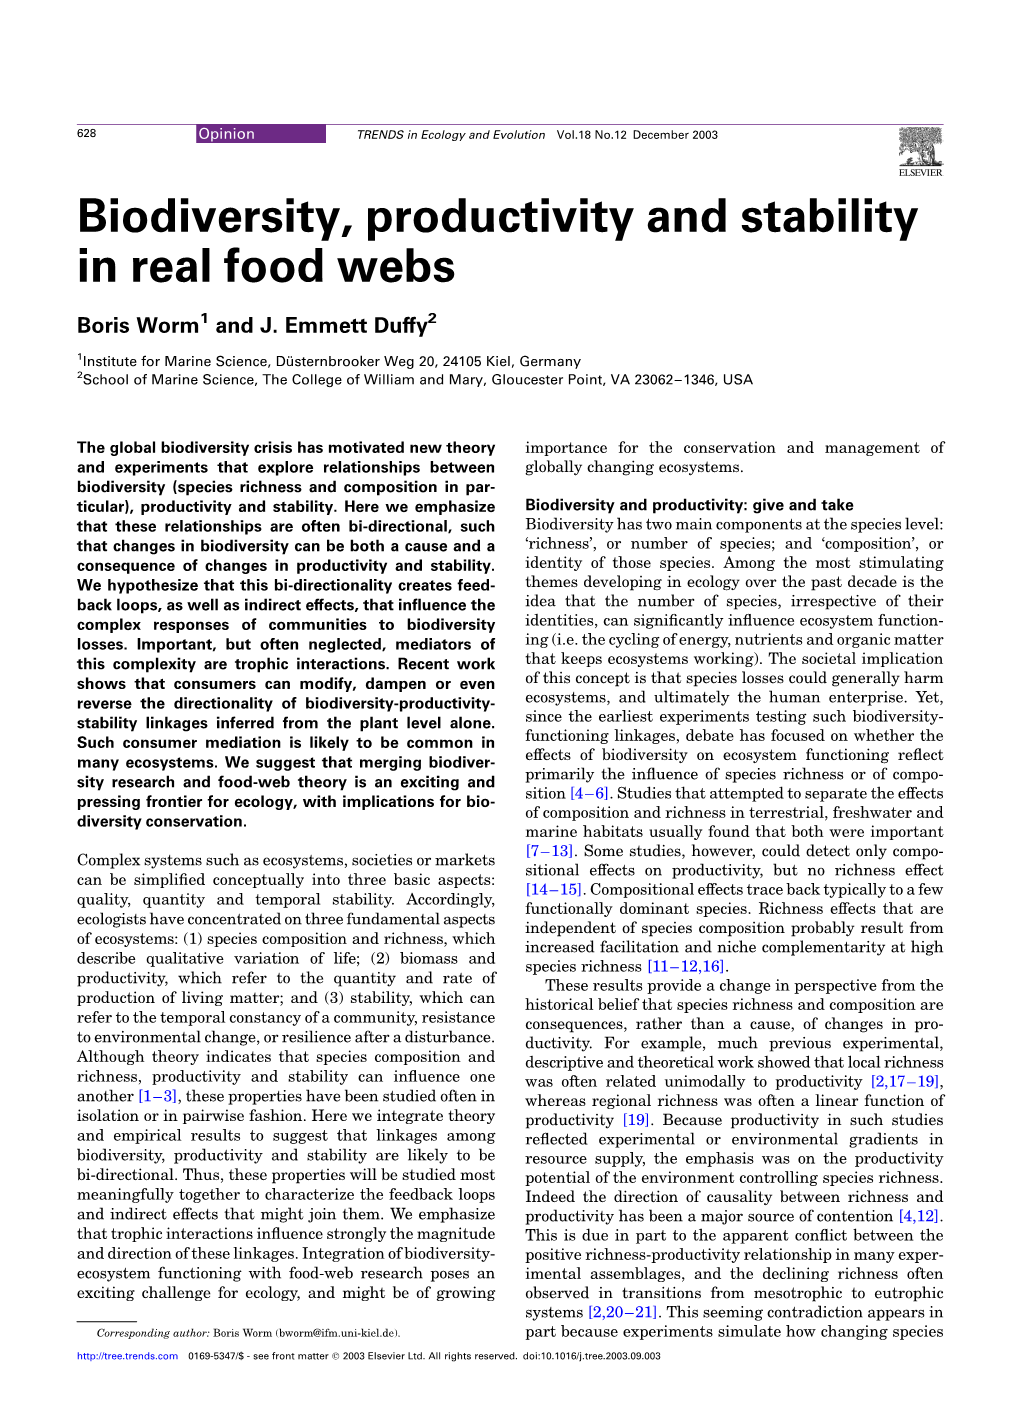 Biodiversity, Productivity and Stability in Real Food Webs